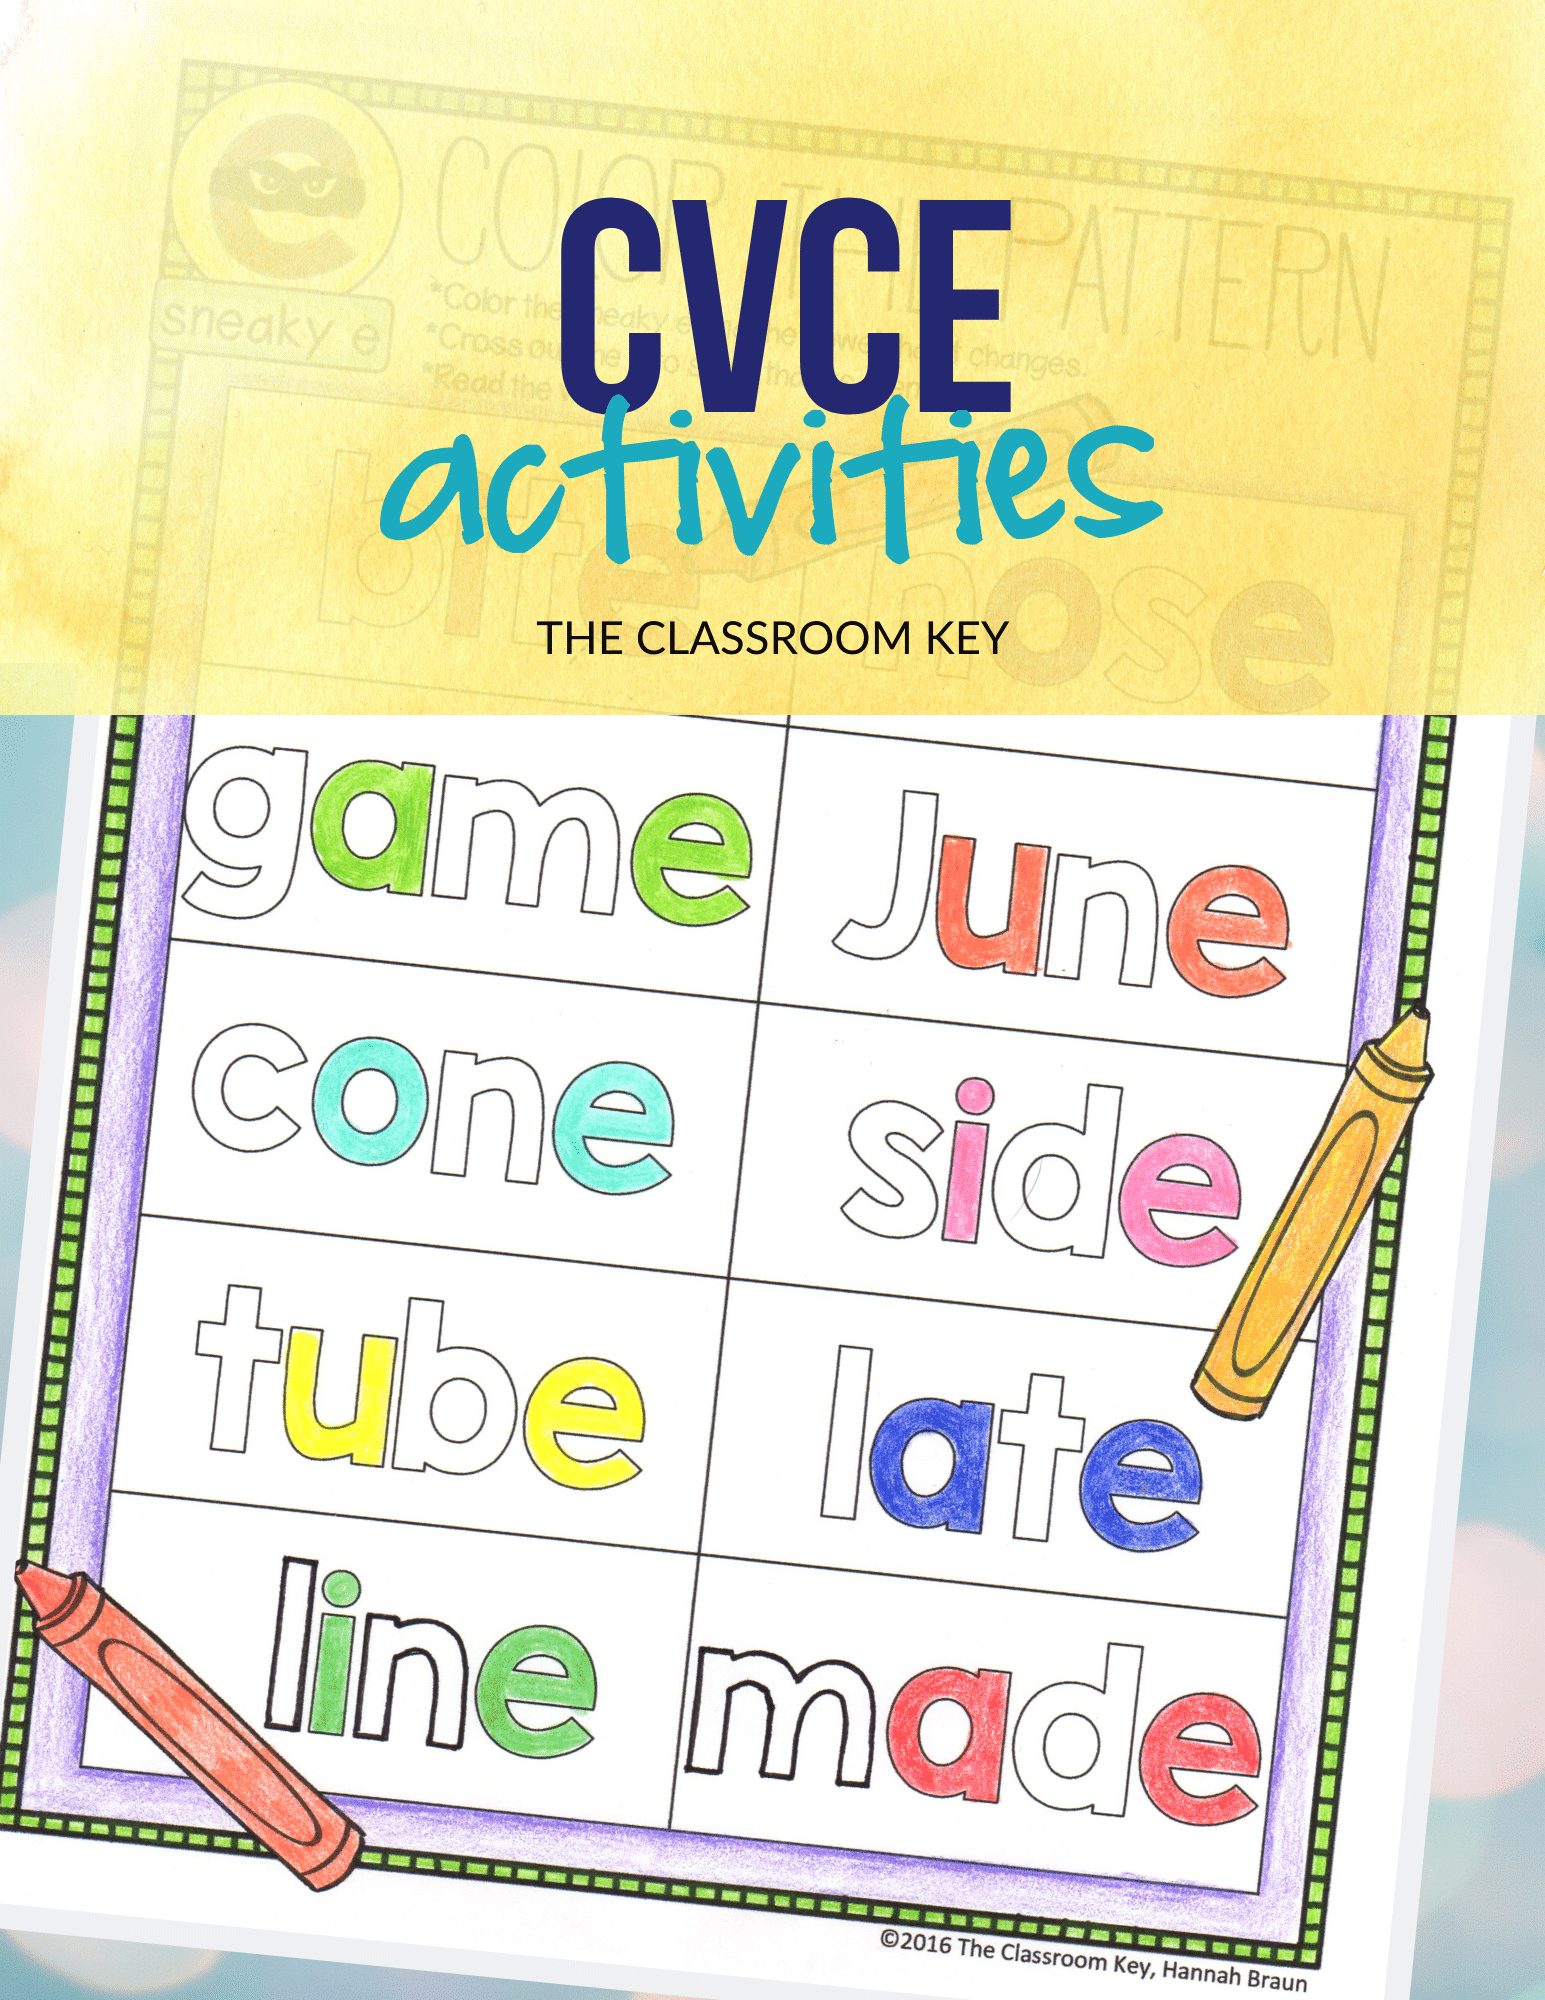 Teach CVCe word patterns to improve reading skills with these activities, posters, mini book and assessments. Perfect for 1st or 2nd grade. Addresses Common Core Standards RF.1.3.C and RF.2.3.A